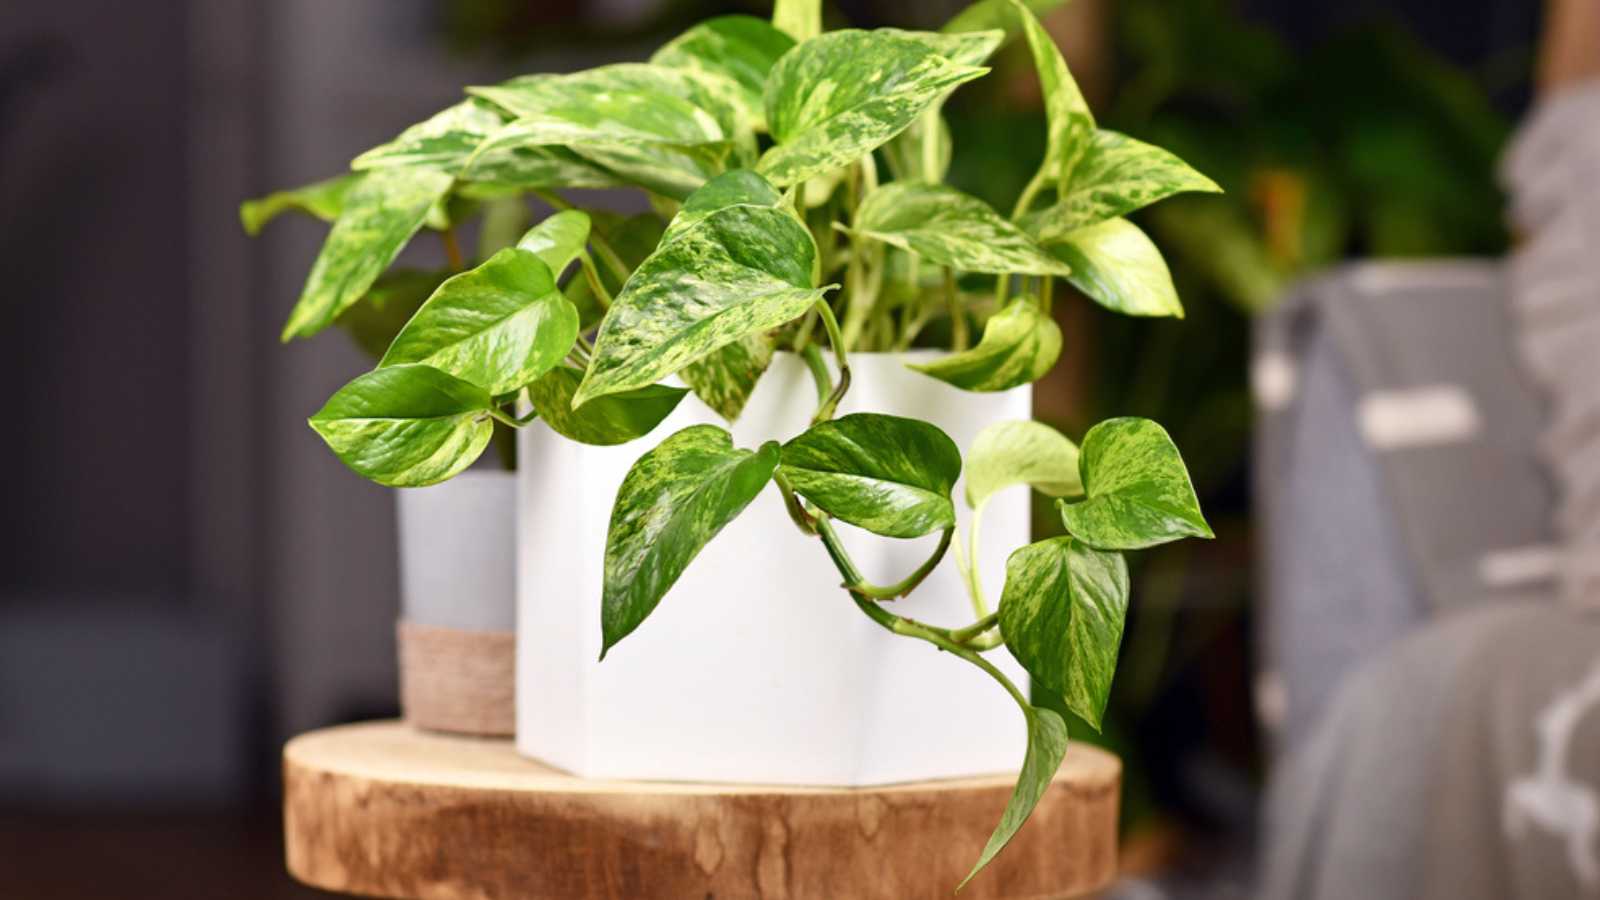 Tropical 'Epipremnum Aureum Marble Queen' pothos houseplant with white variegation in flower pot on wooden table